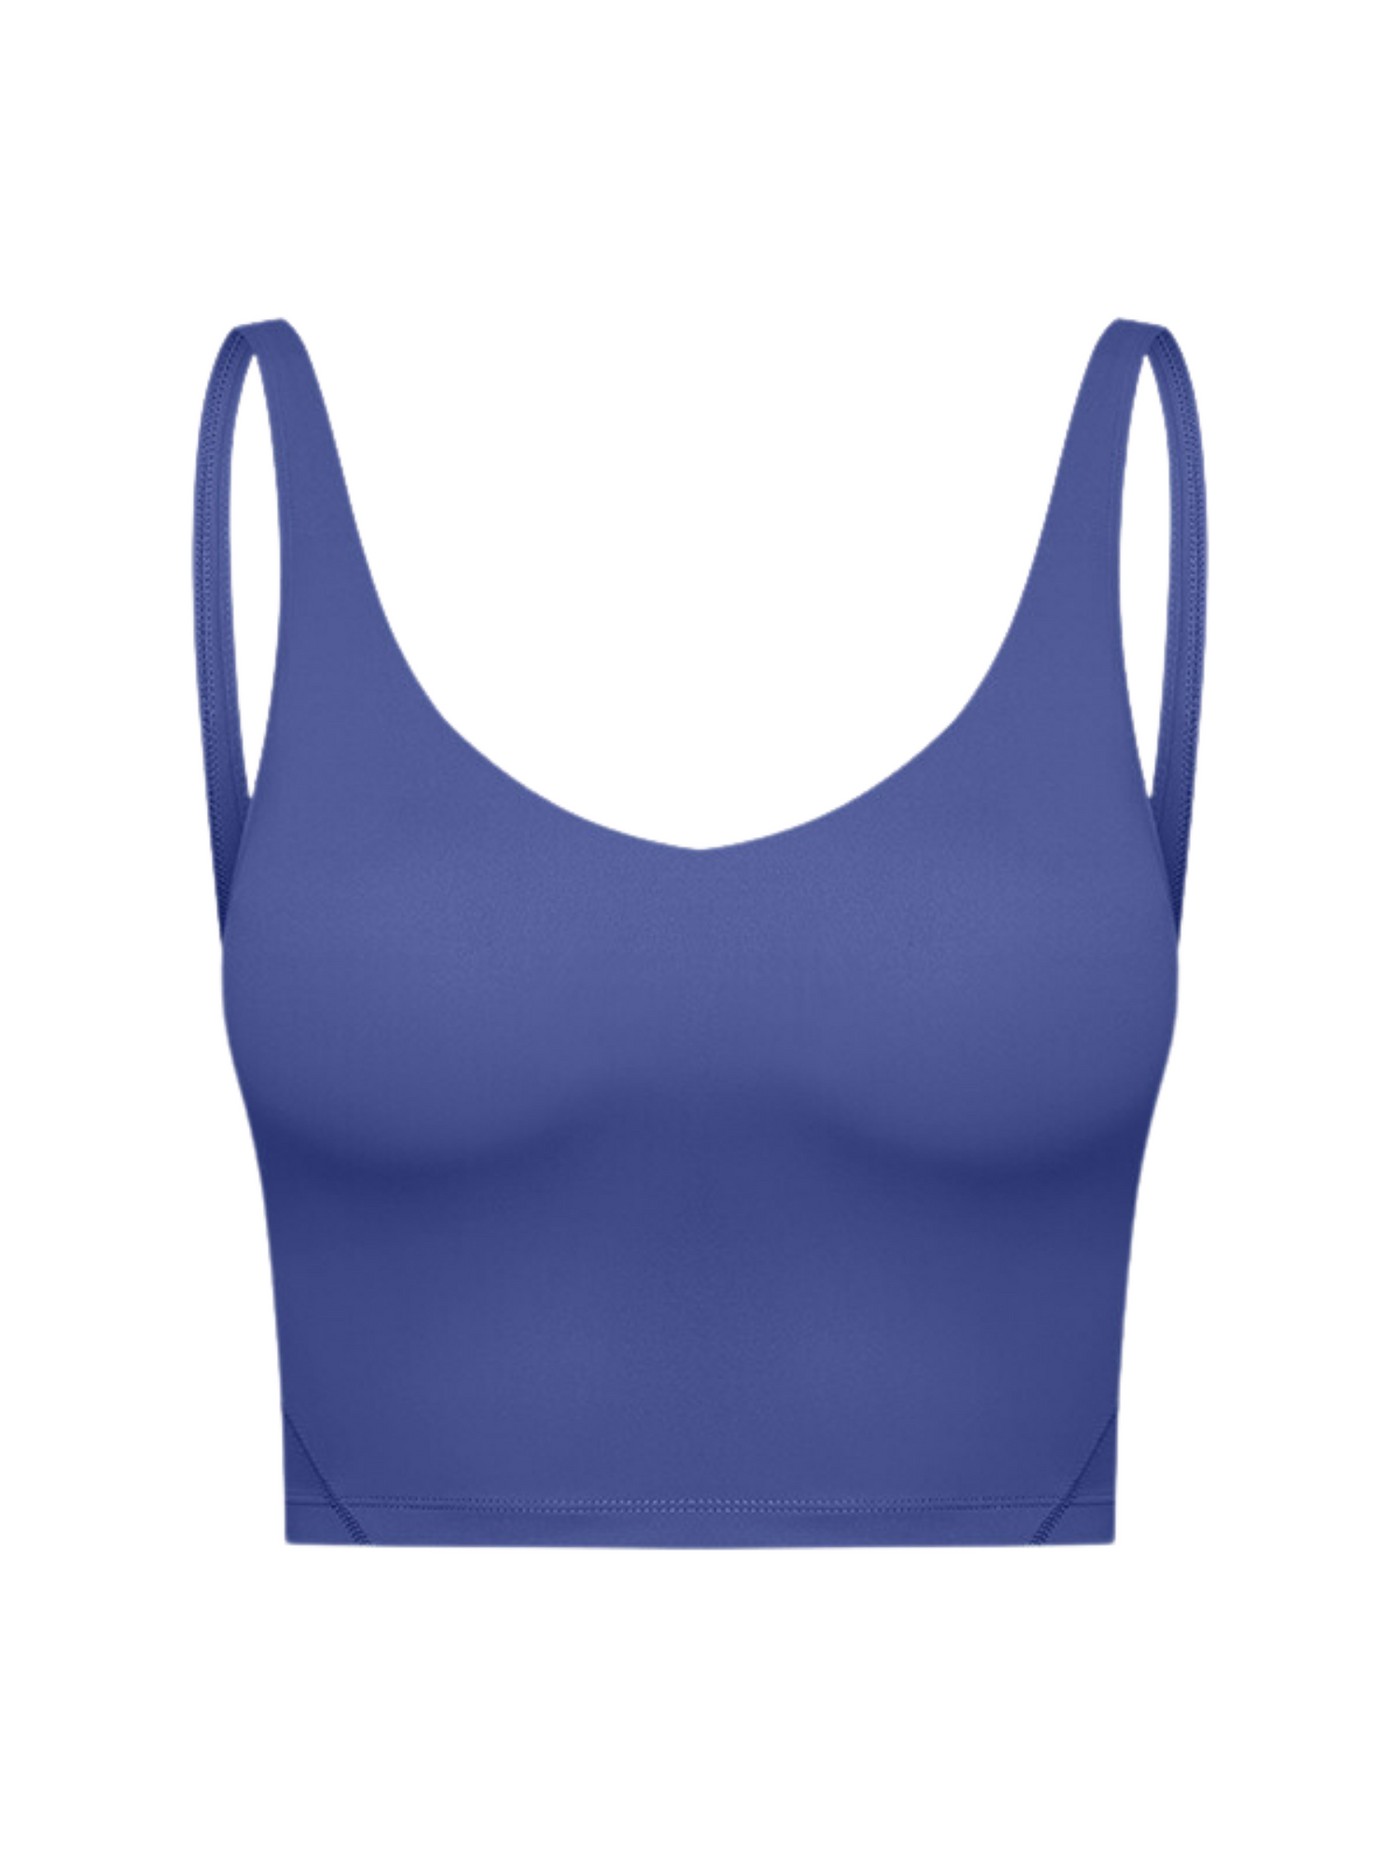 Navalora Fit Arabelle Longline Bra with Removable Pads Align Tank in Azure Blue Detail View